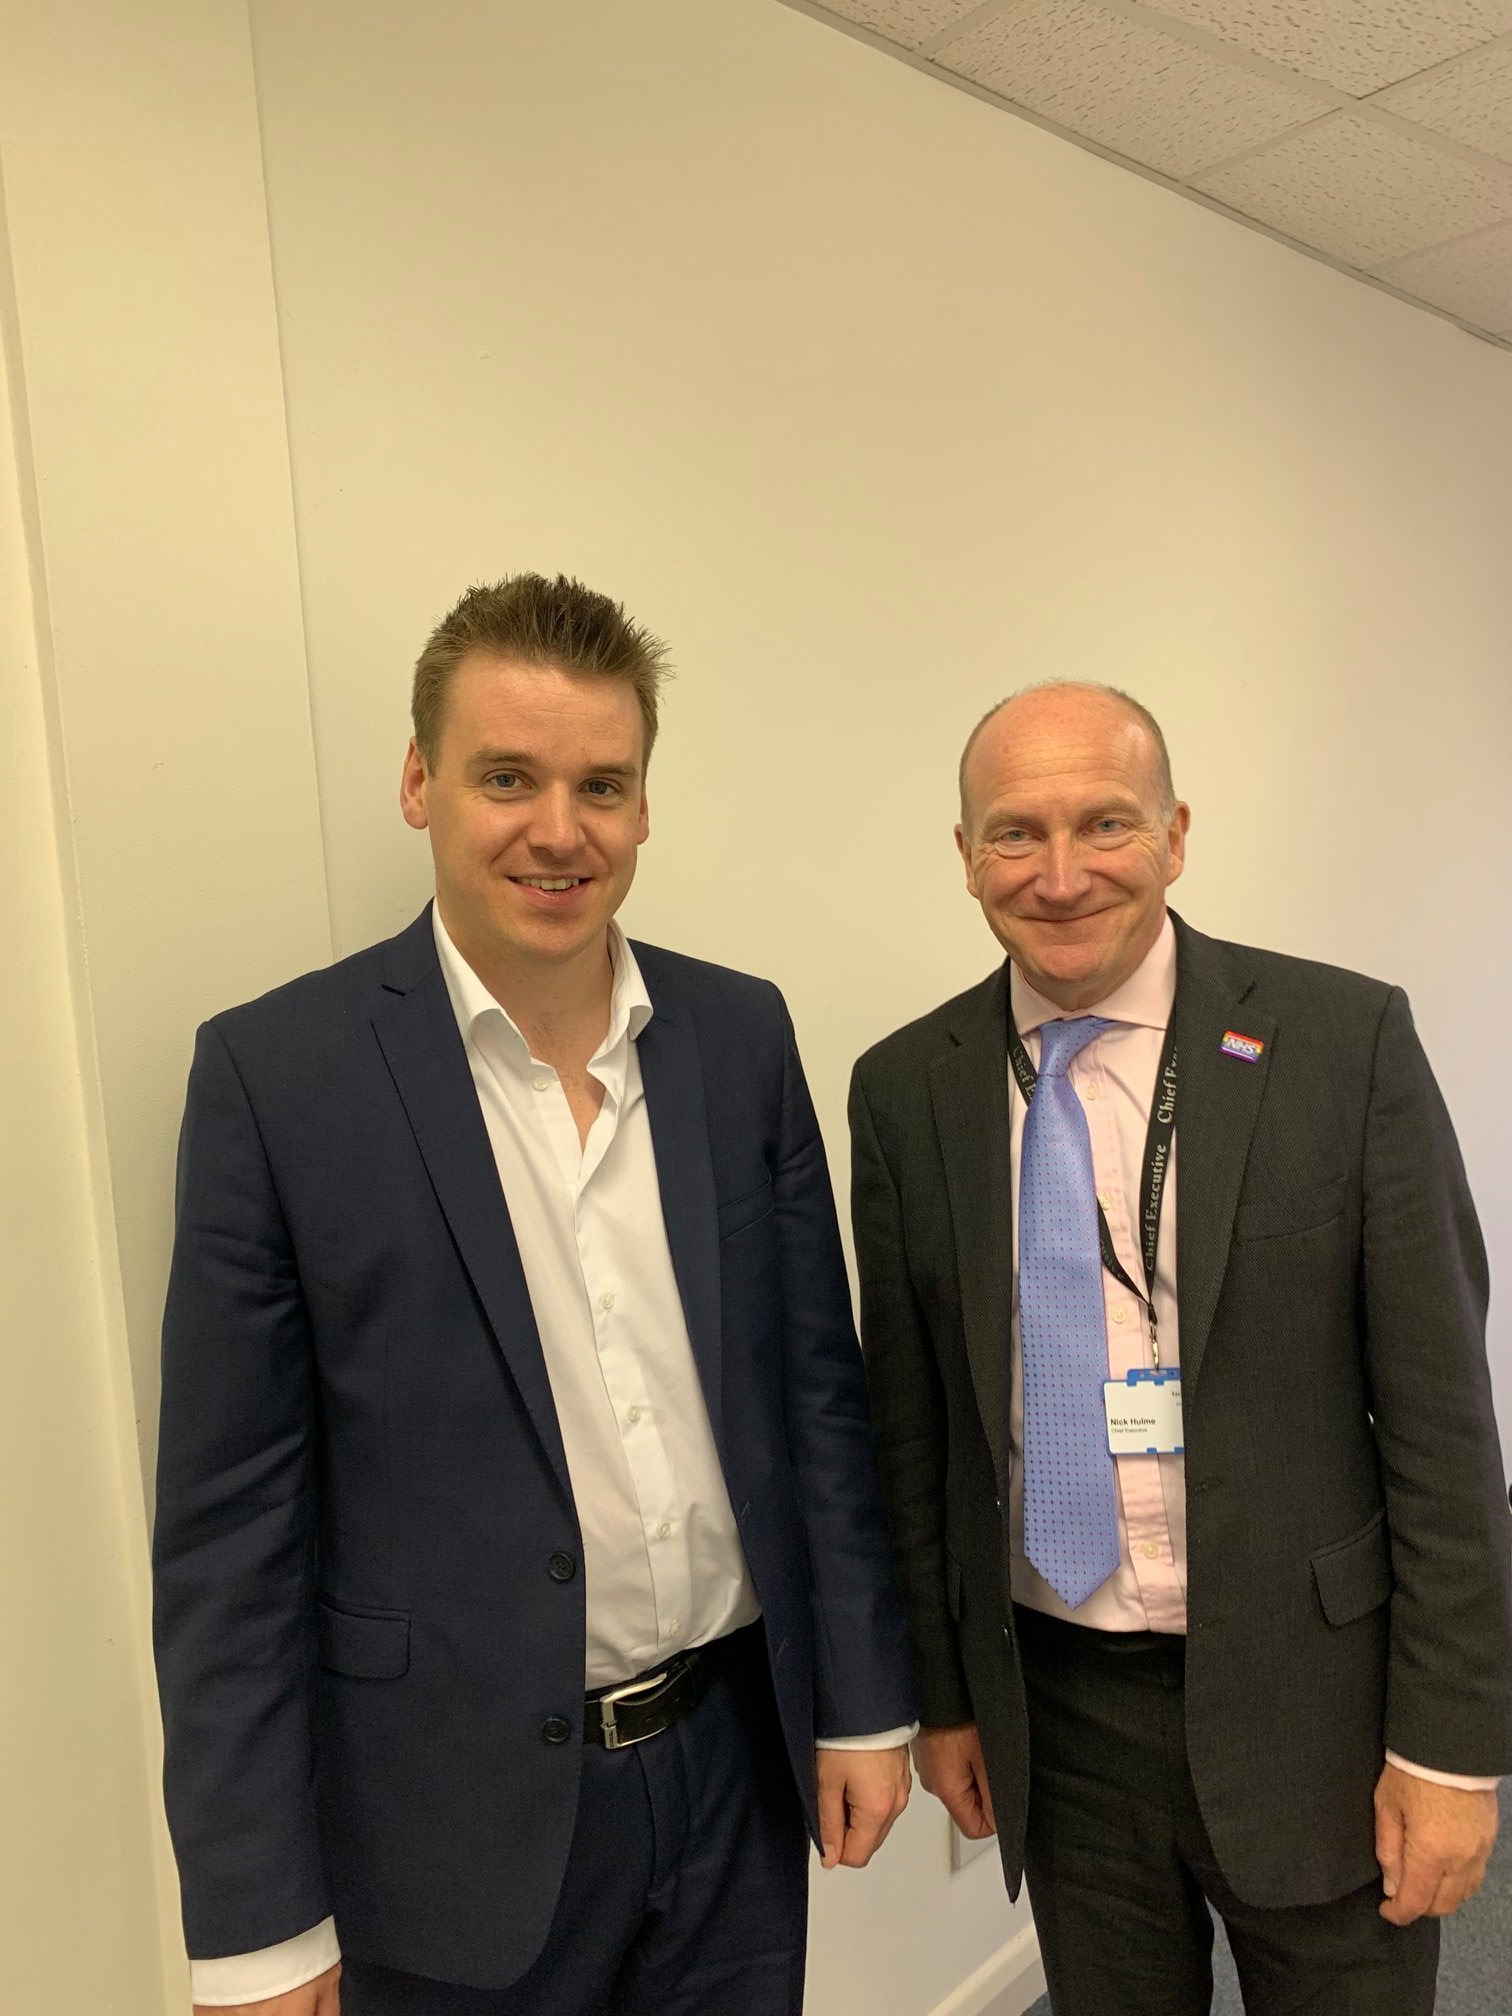 On Friday the Chief Executive of Ipswich Hospital Nick Hulme visited my Ipswich office to discuss the latest Care Quality Commission inspection report into the East Suffolk and North Essex Foundation Trust.